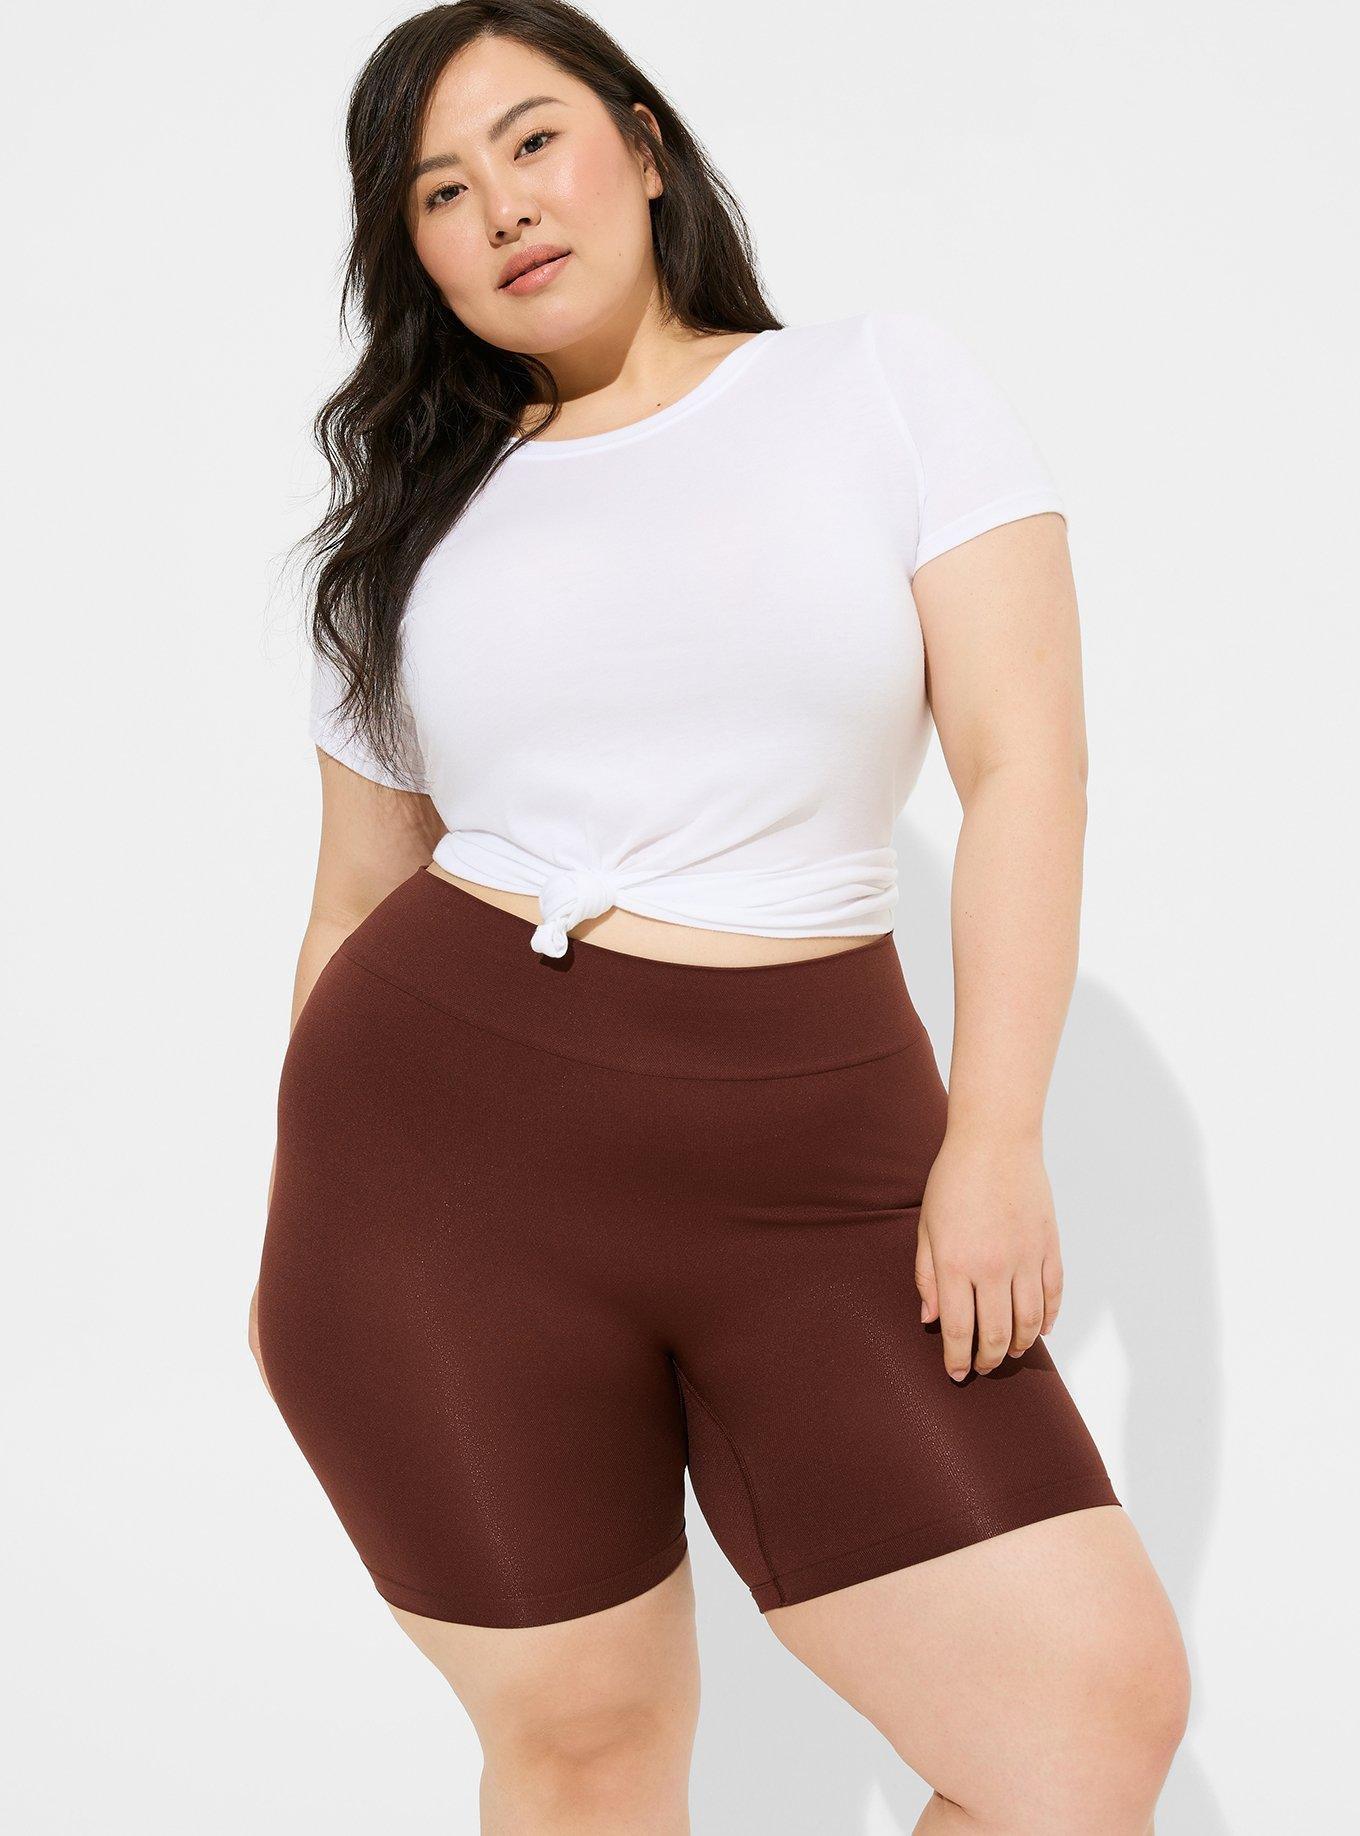 High-Rise Seamless Shorty